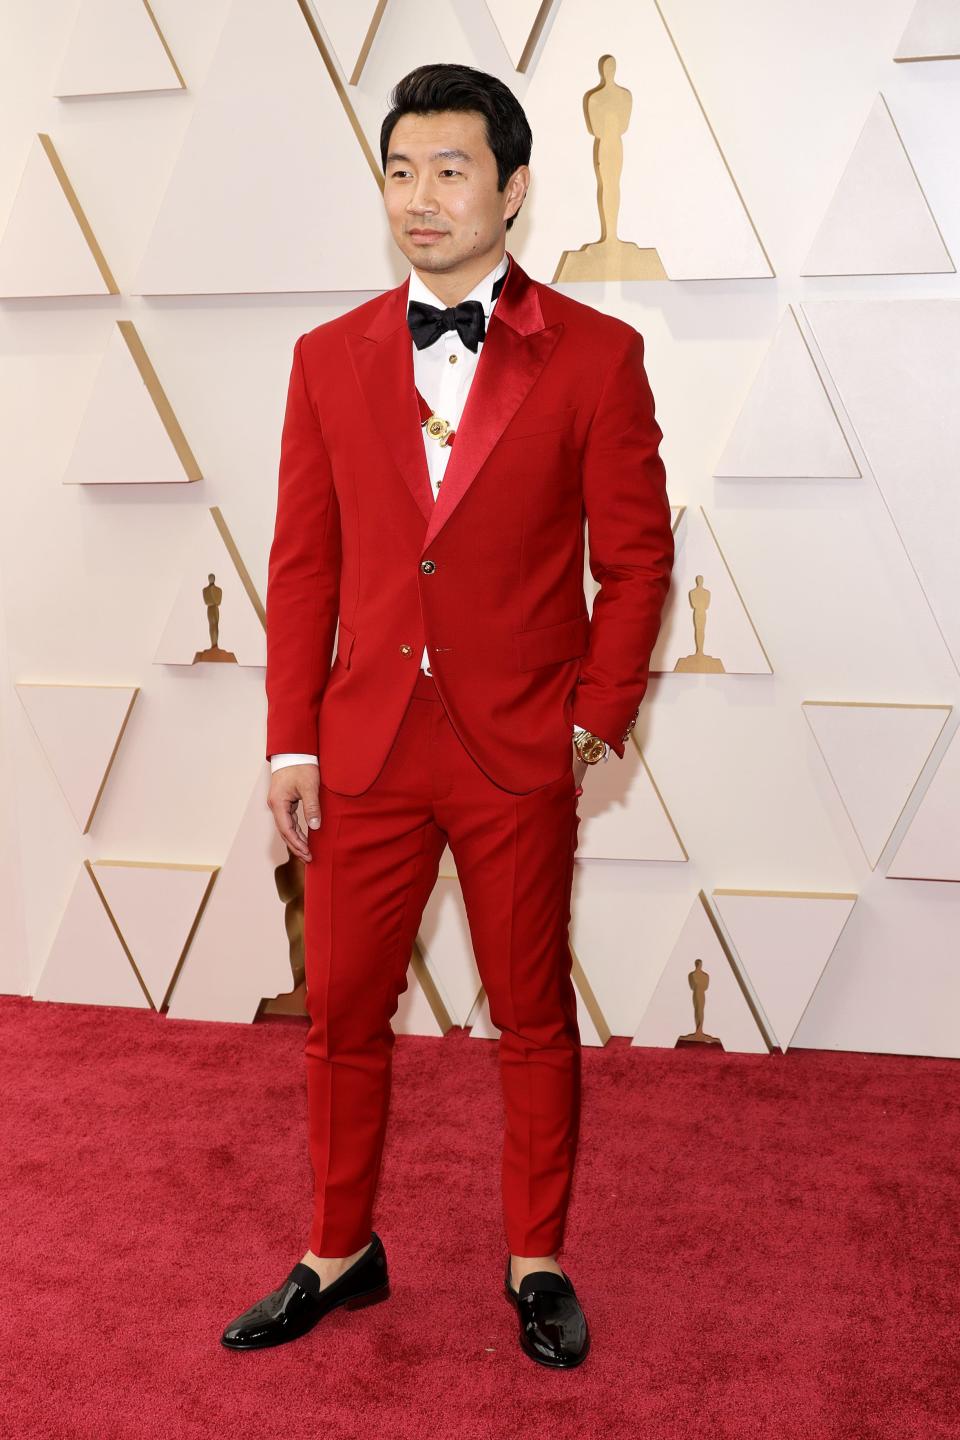 Simu in a bright red suit with satin lapels and a black bow tie. he has a brand with a gold buckle going across his chest under his jacket and above his white shirt. He has black shiny loafers on.